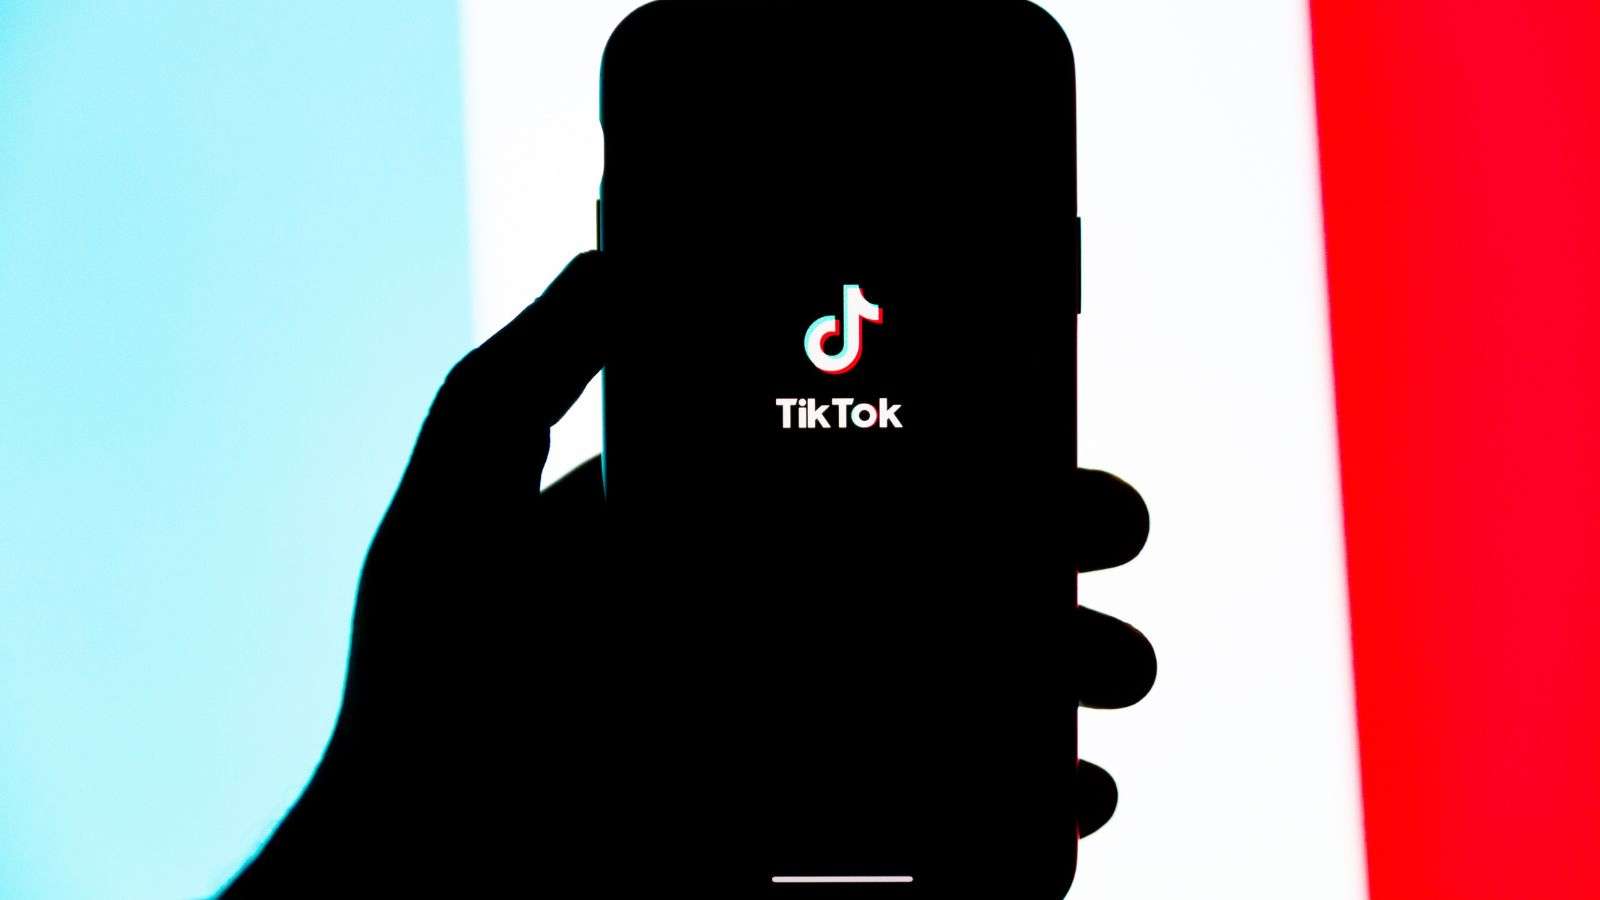 What happens when everything on TikTok is for sale?